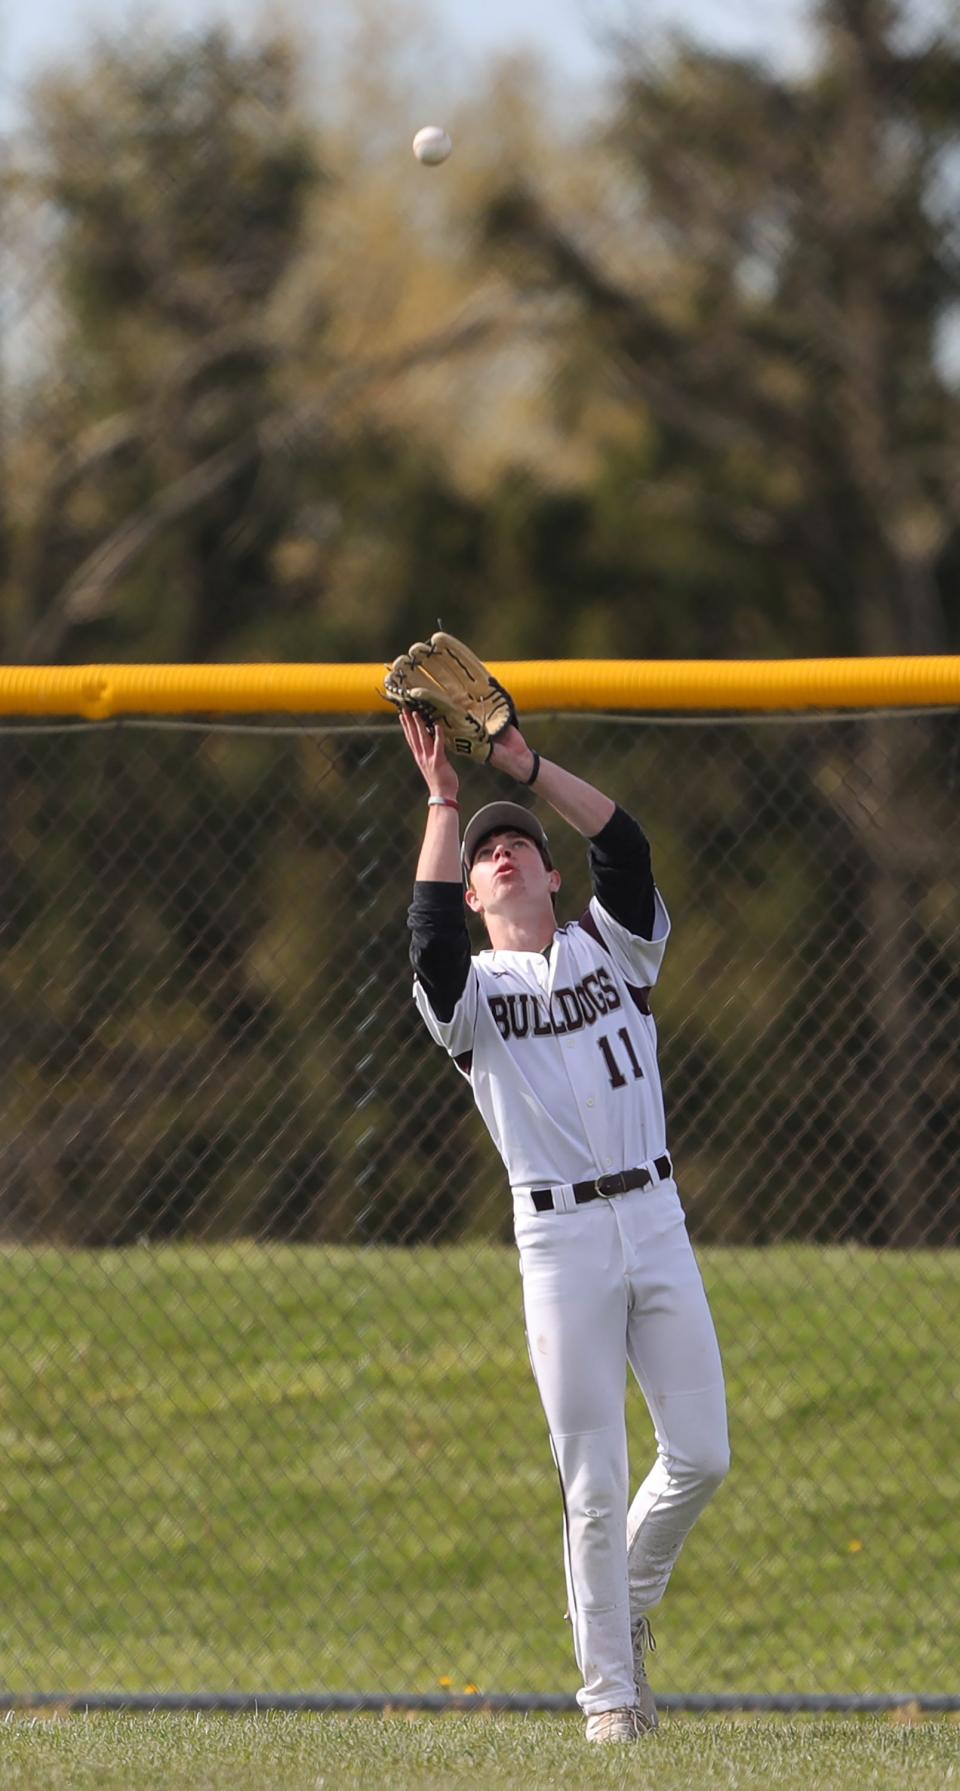 Woodridge right fielder Nathan Martin gets under a fly ball hit by STVM's Jakeb Beard during the third inning on May 4 in Cuyahoga Falls.